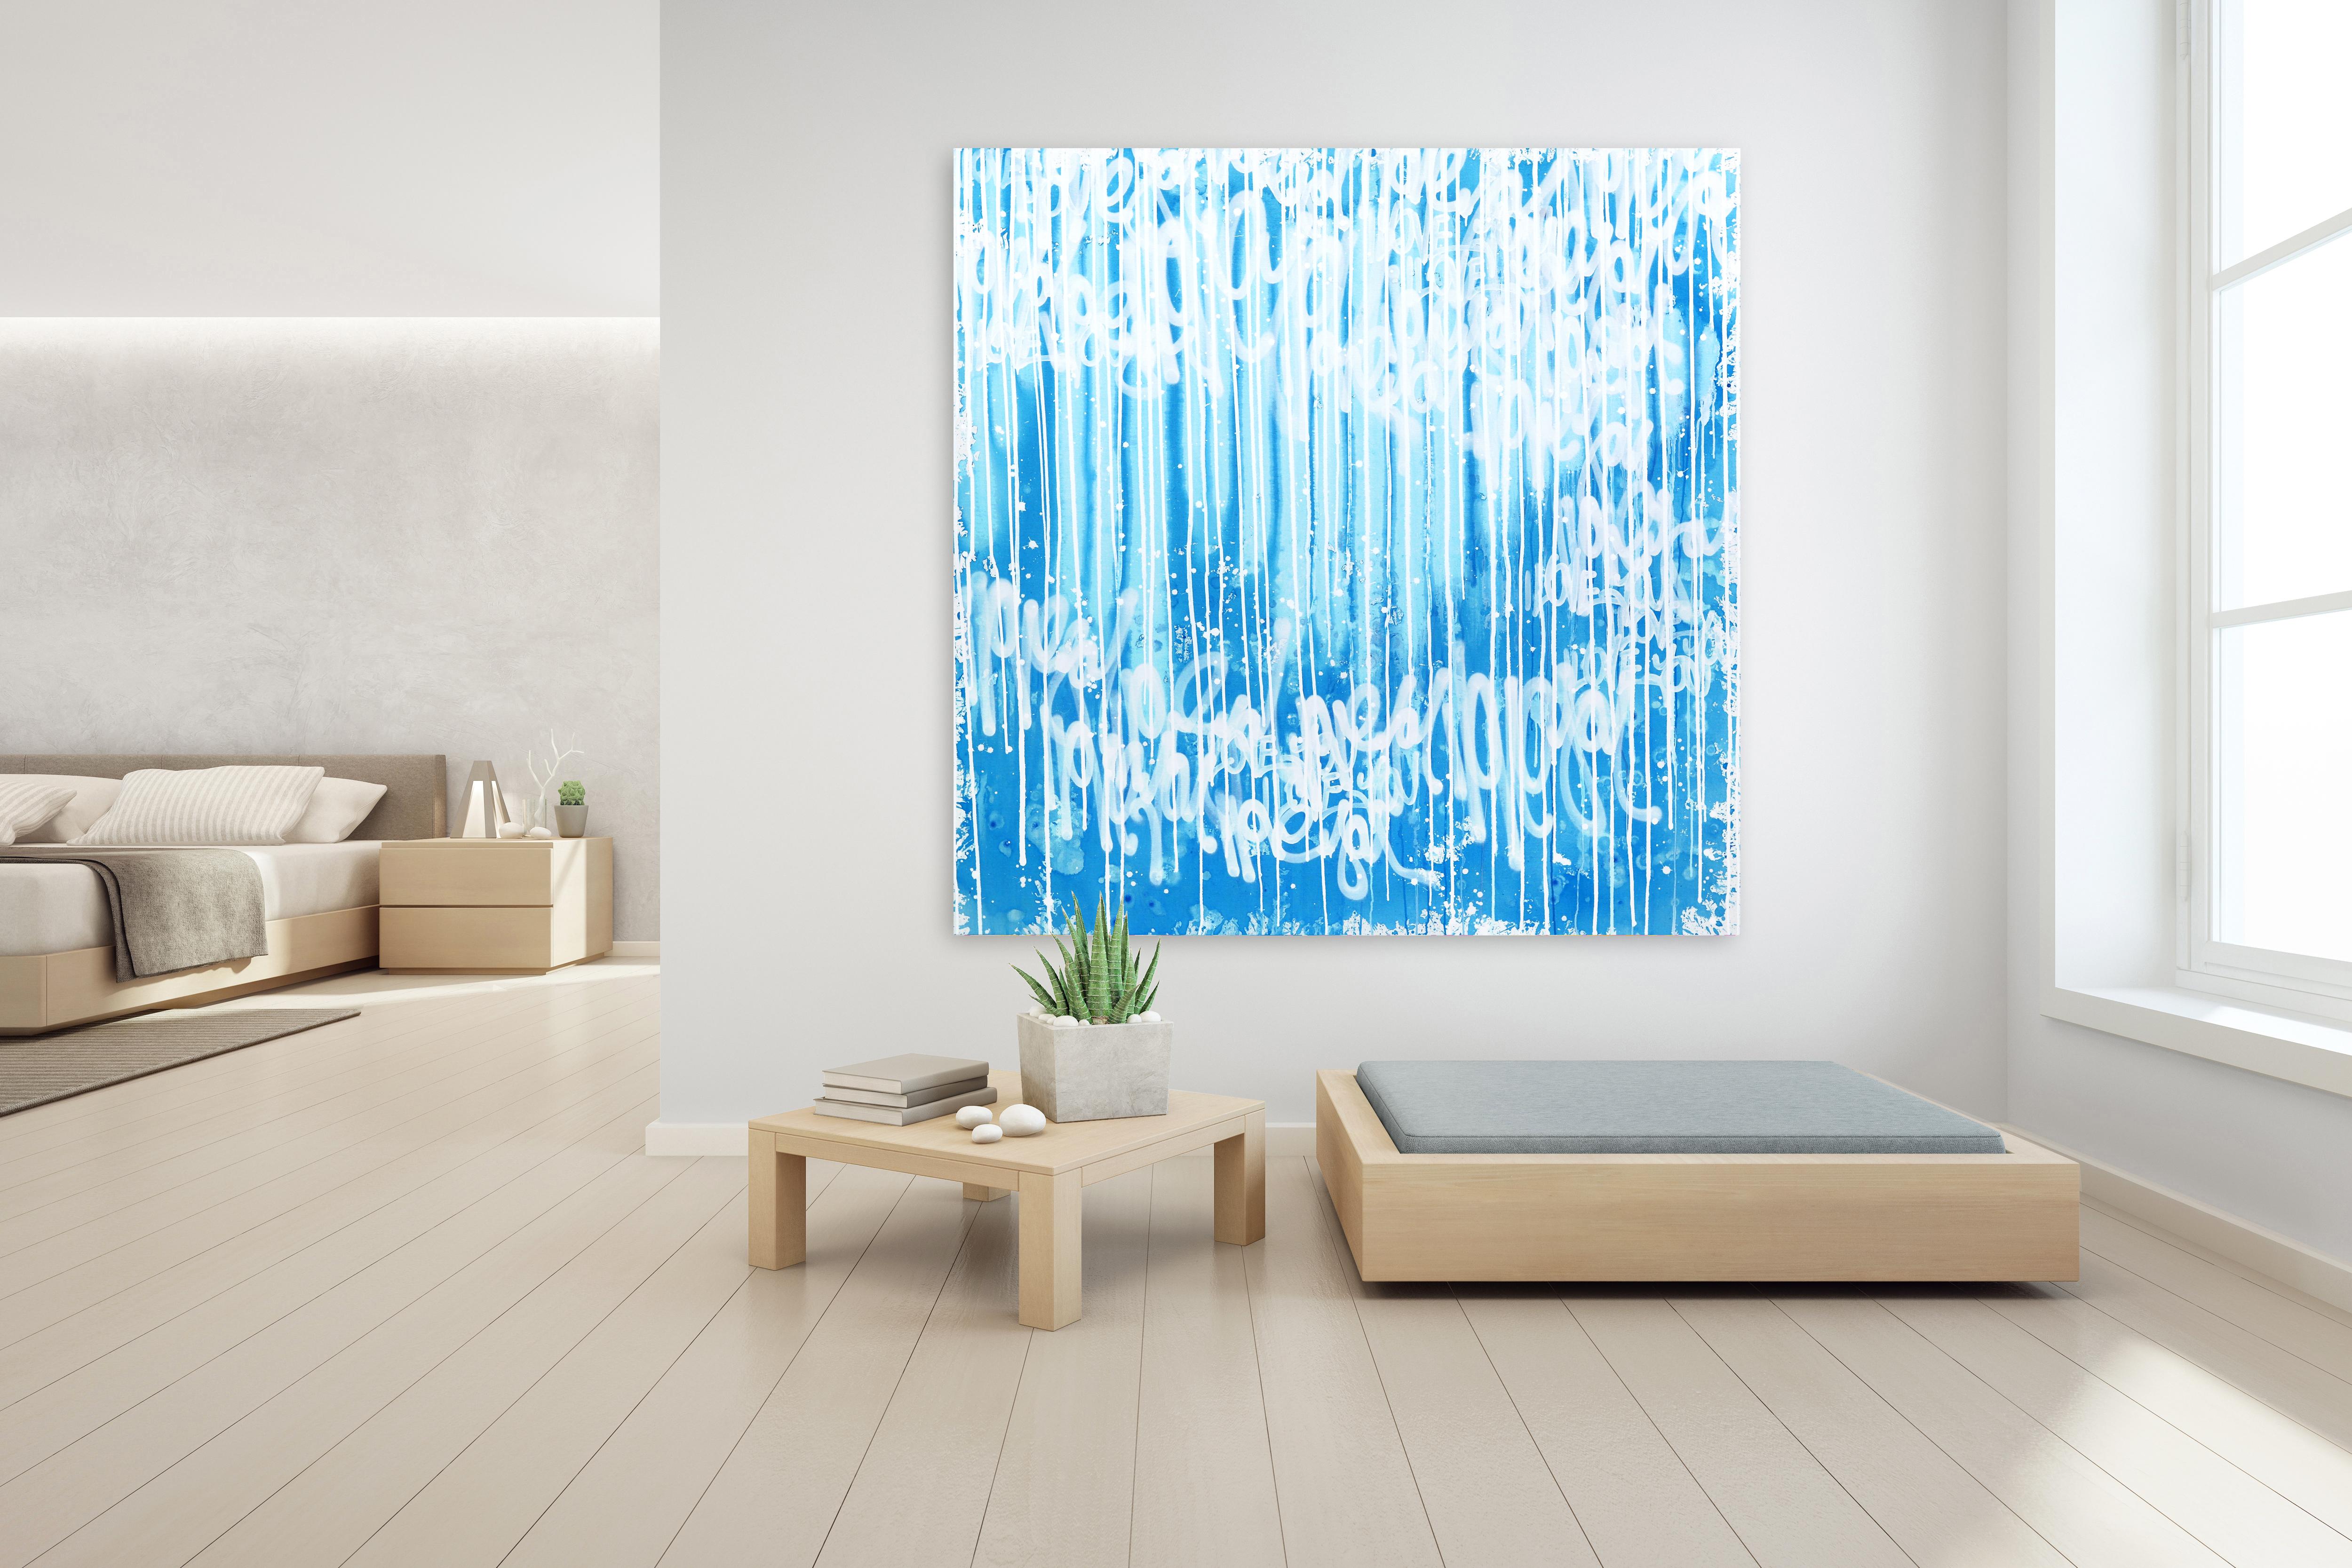 Paradise Cove - Soothing Blue Large Original Layered Painting on Canvas - Abstract Mixed Media Art by Amber Goldhammer